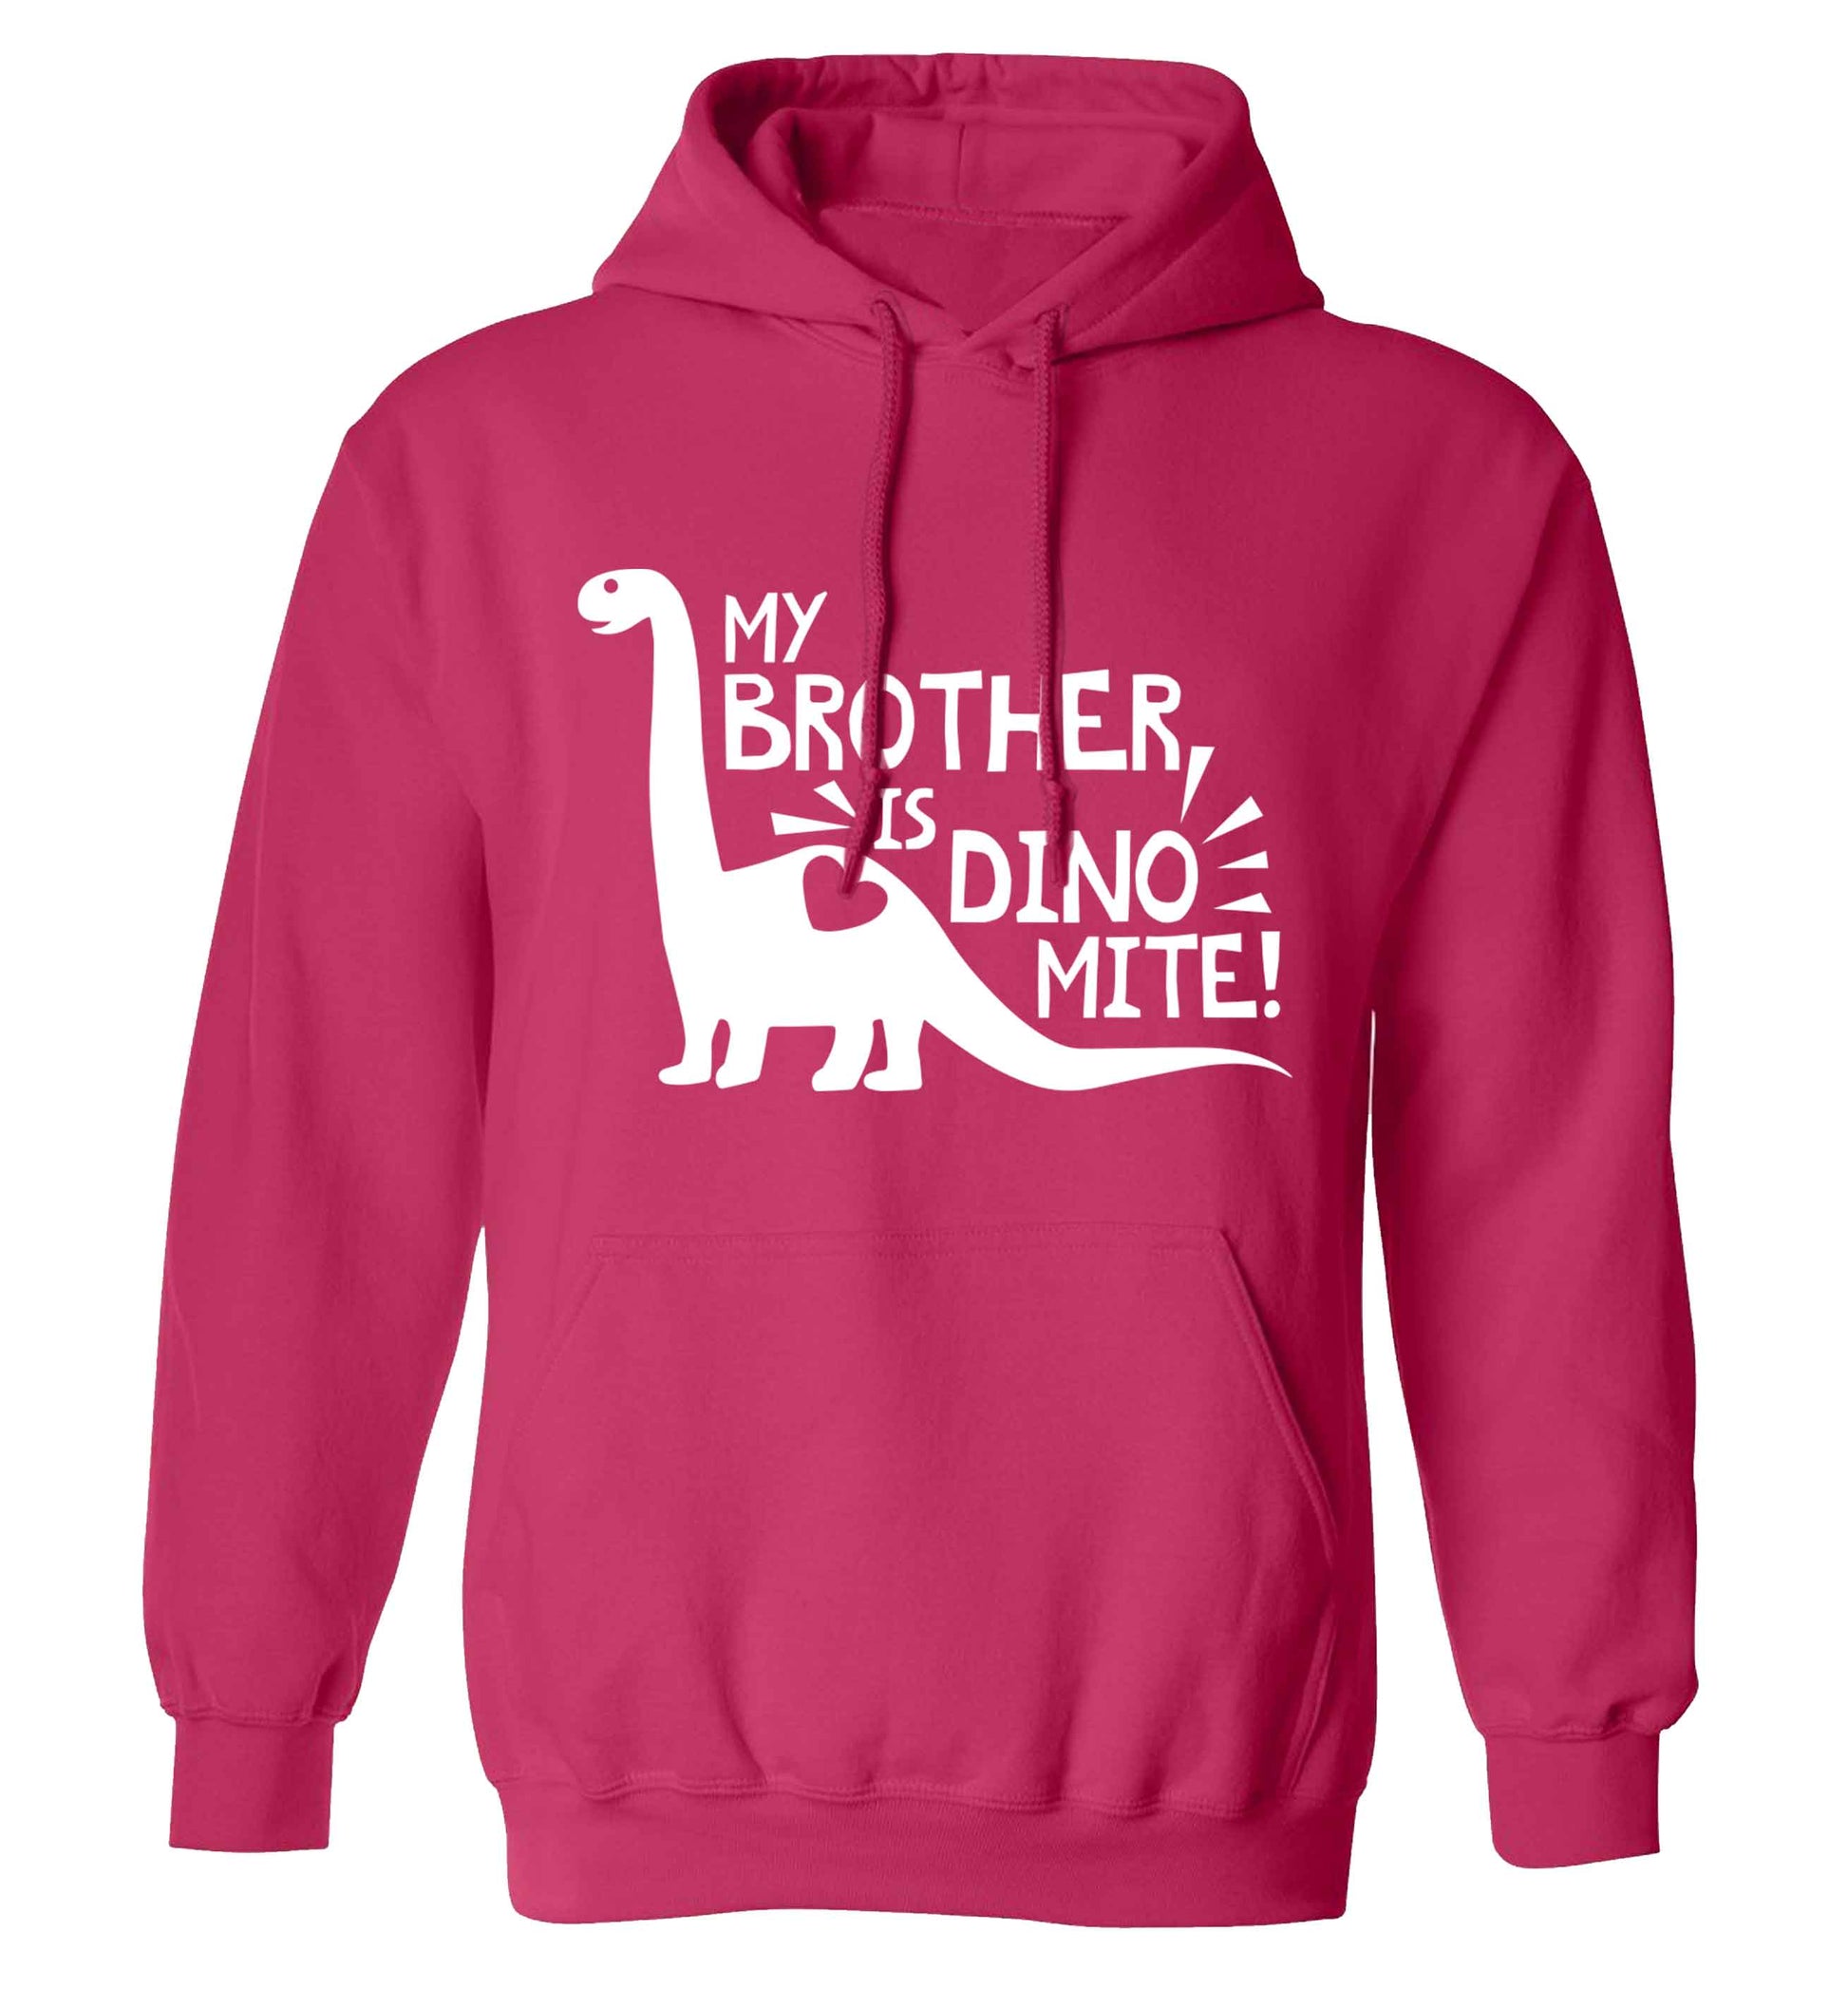 My brother is dinomite! adults unisex pink hoodie 2XL